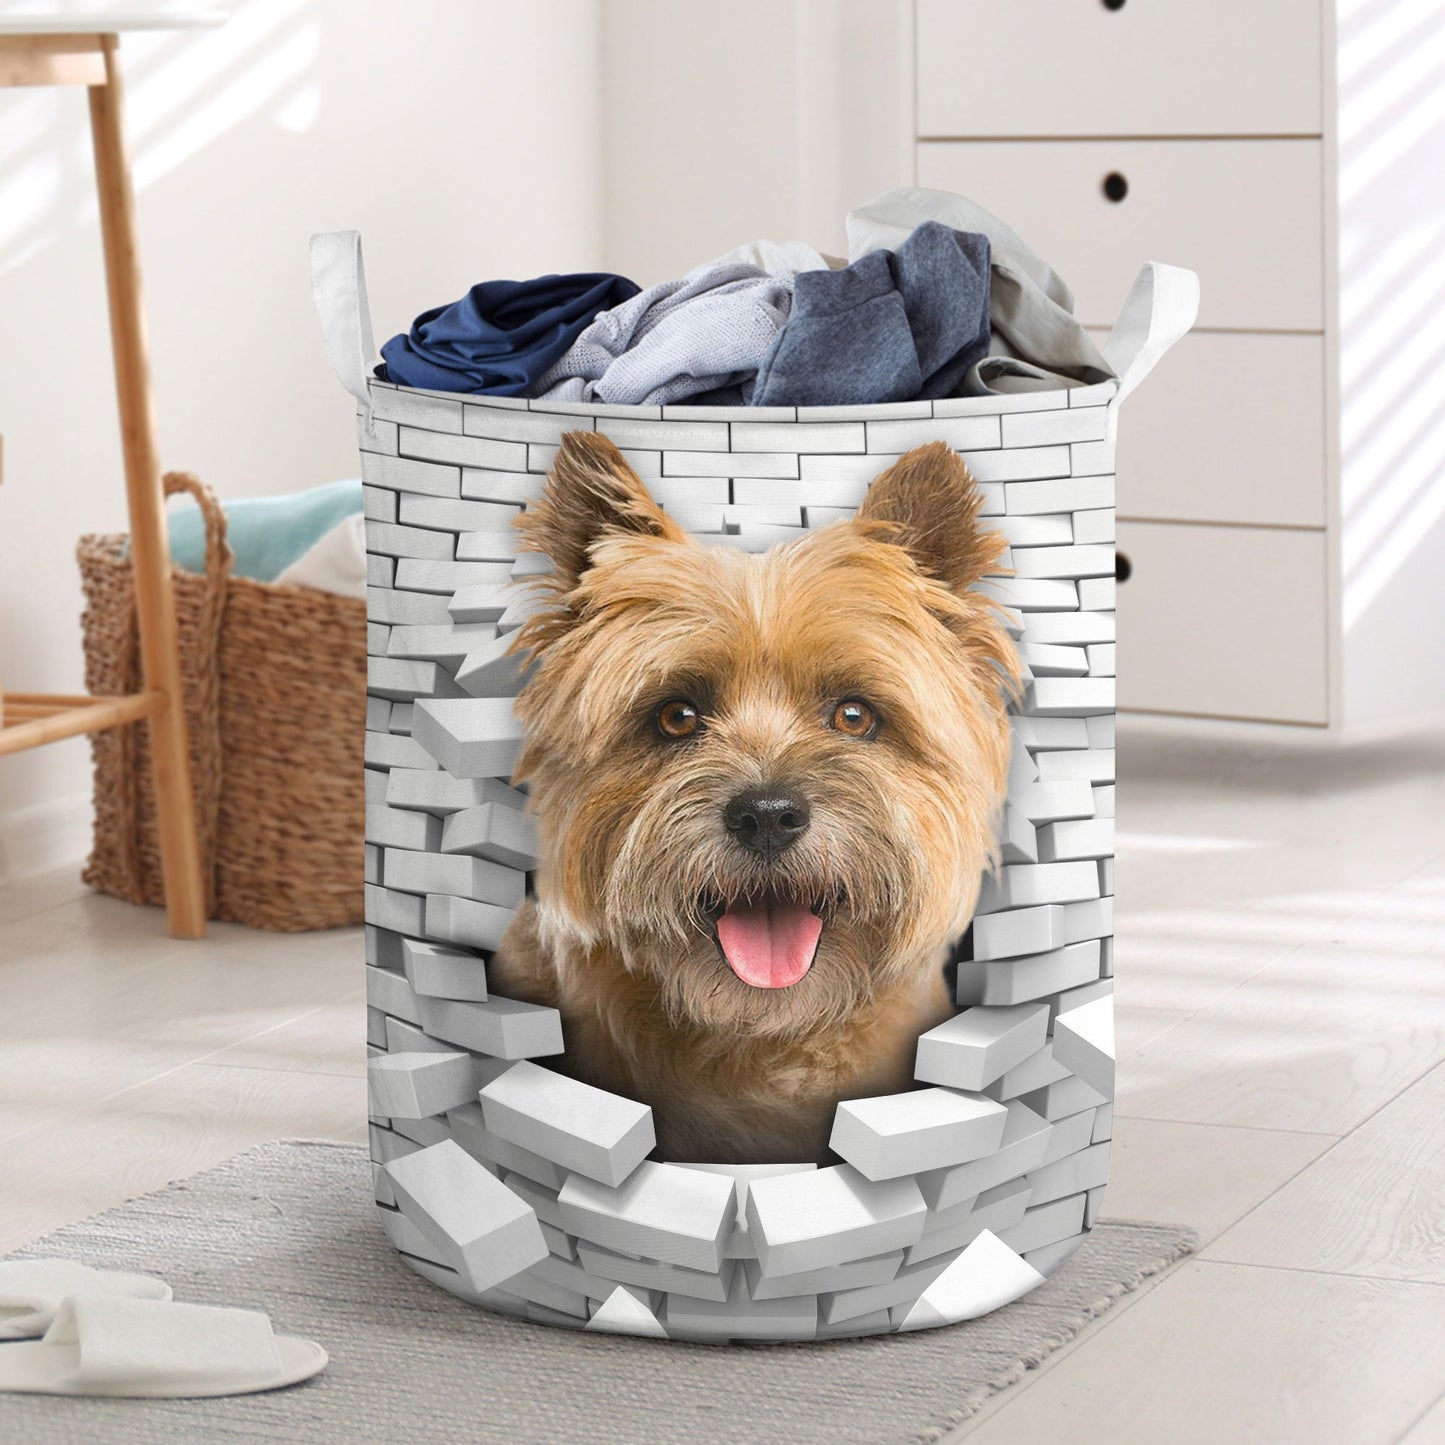 Cairn Terrier - In The Hole Of Wall Pattern Laundry Basket